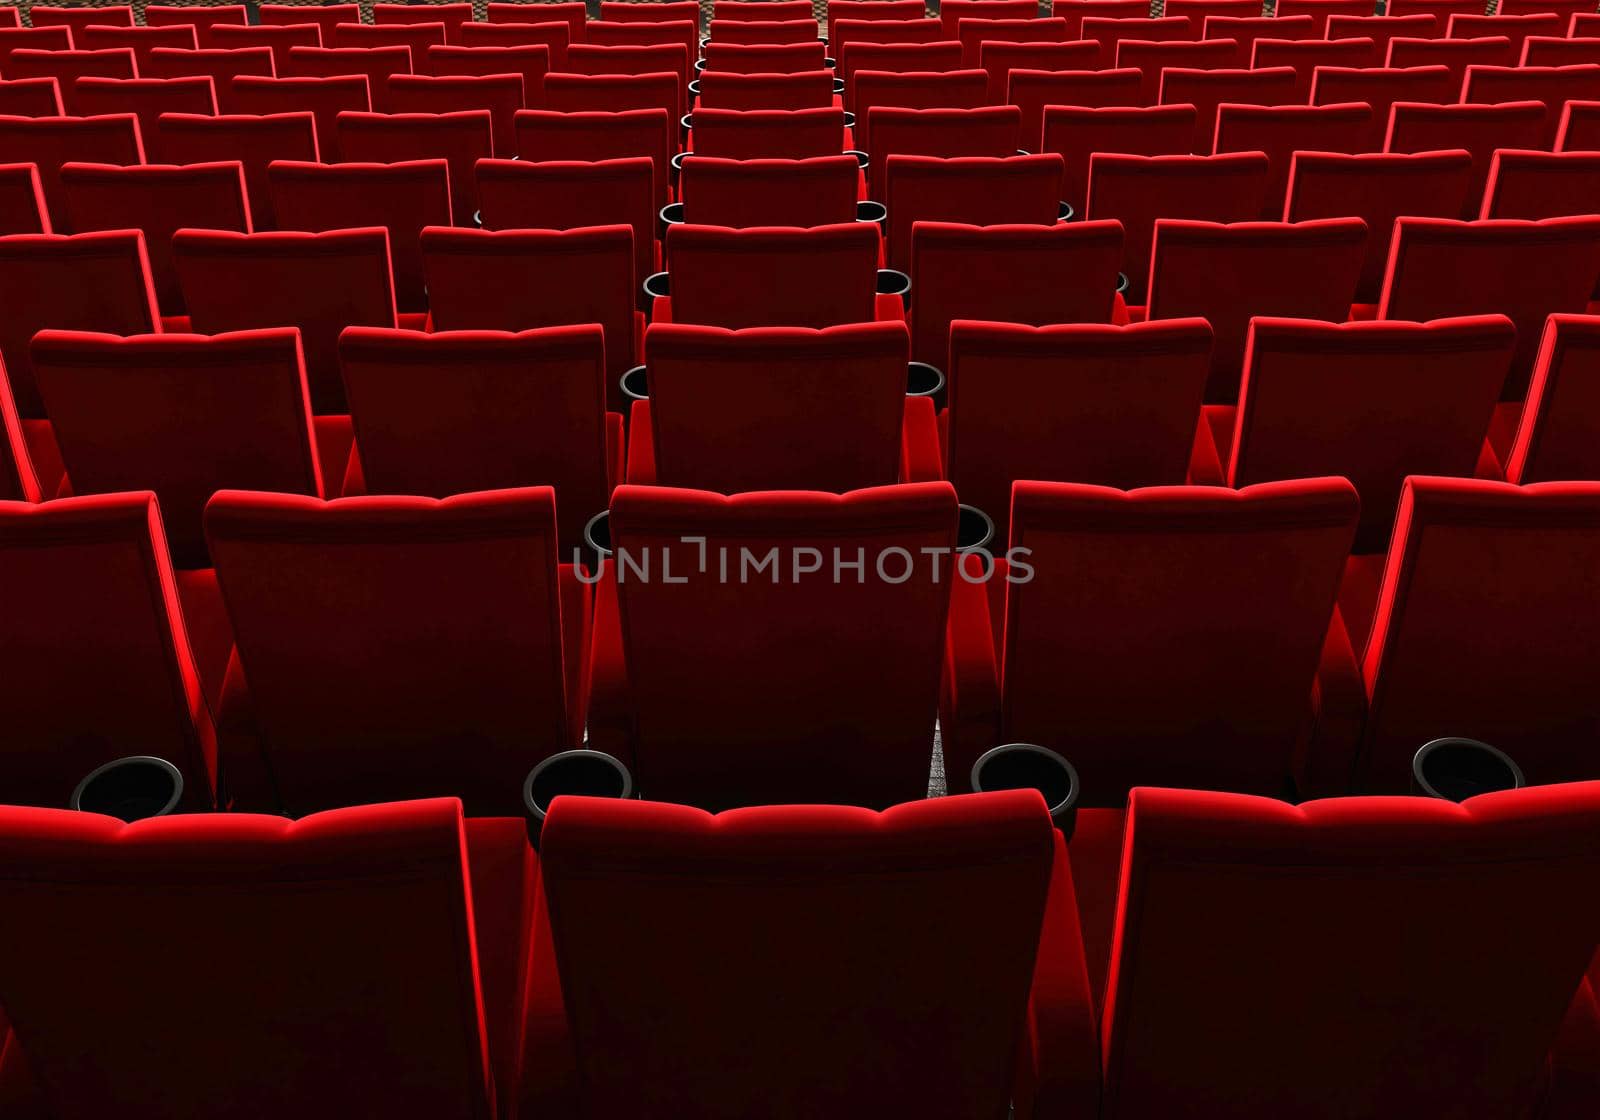 Rows of red velvet seats watching movies in the cinema with copy space banner background. Entertainment and Theater concept. 3D illustration rendering